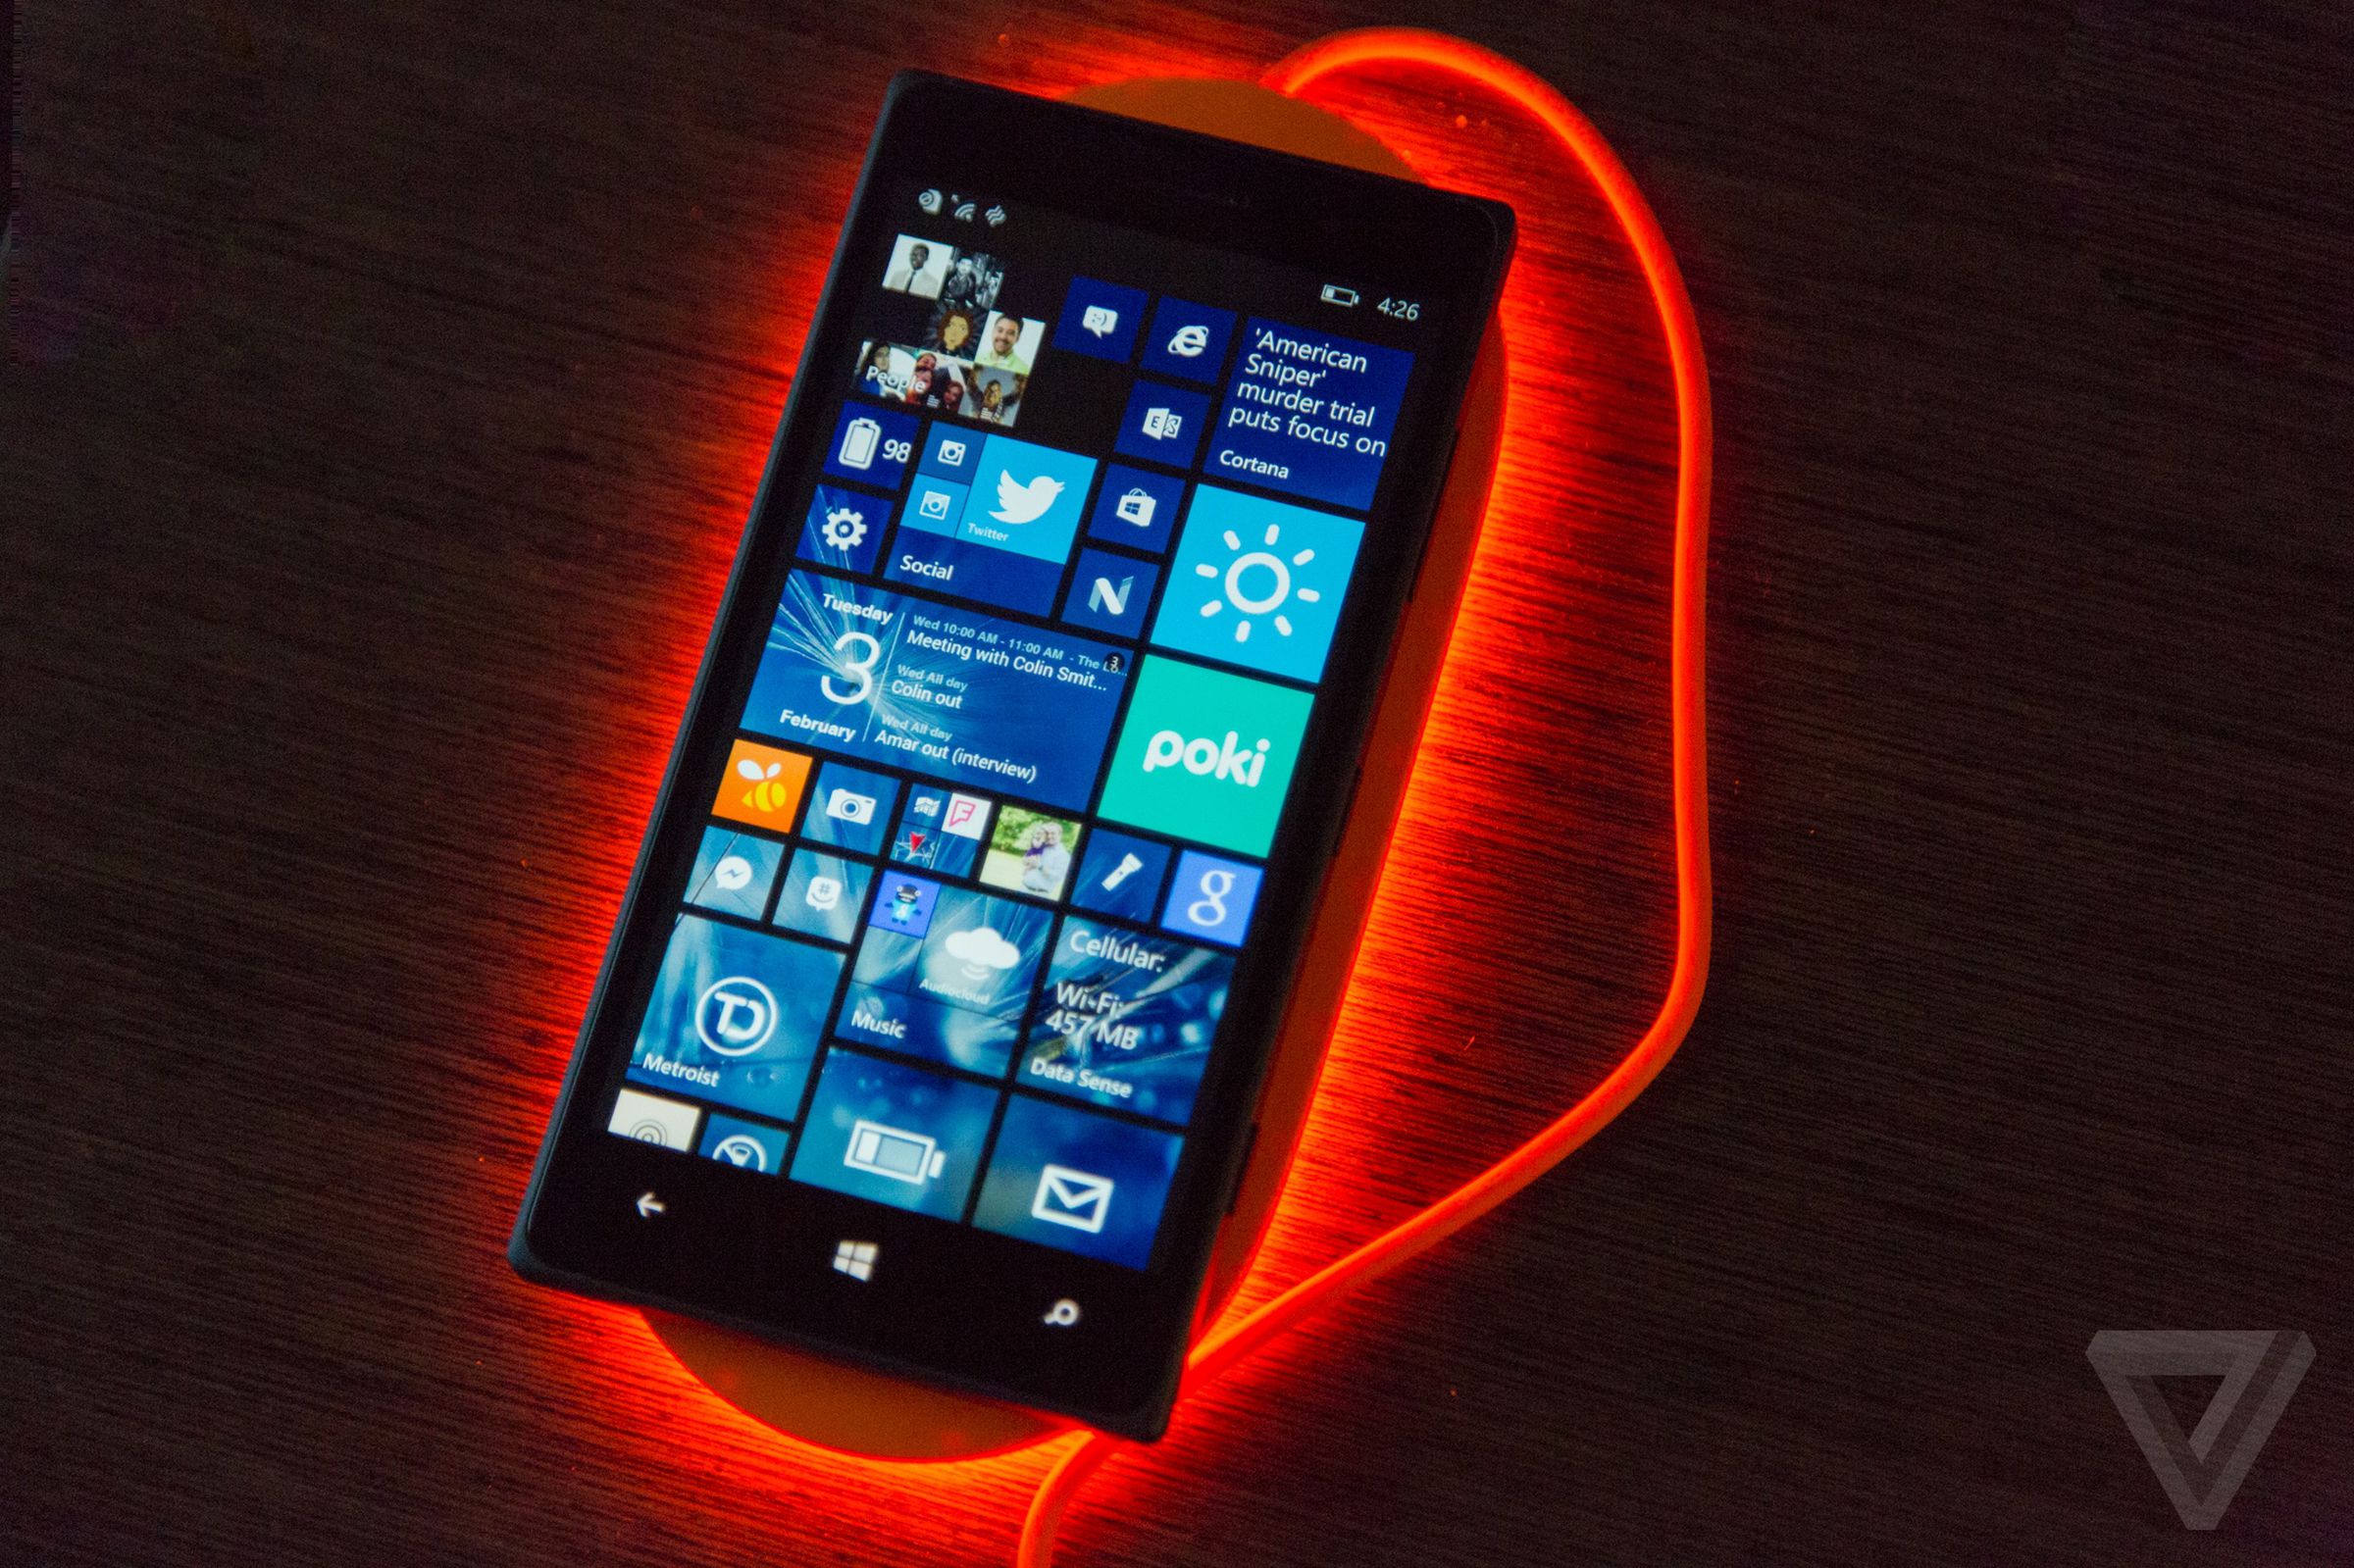 Nokia wireless charging plate hands-on photos